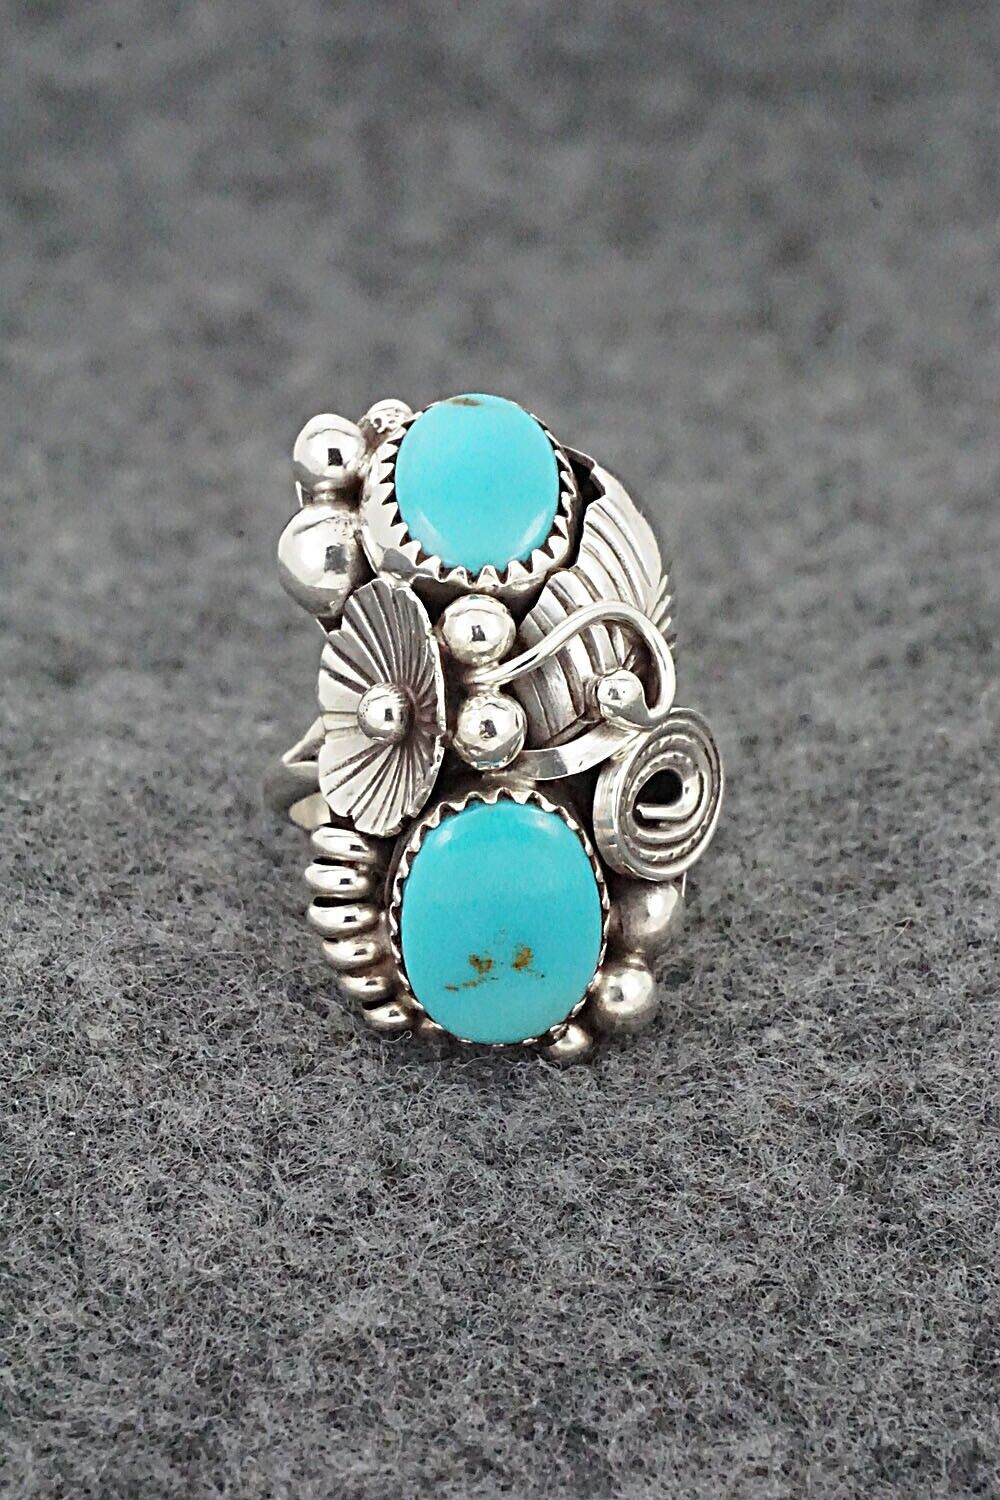 Turquoise & Sterling Silver Ring - Max Calladitto - Size 5